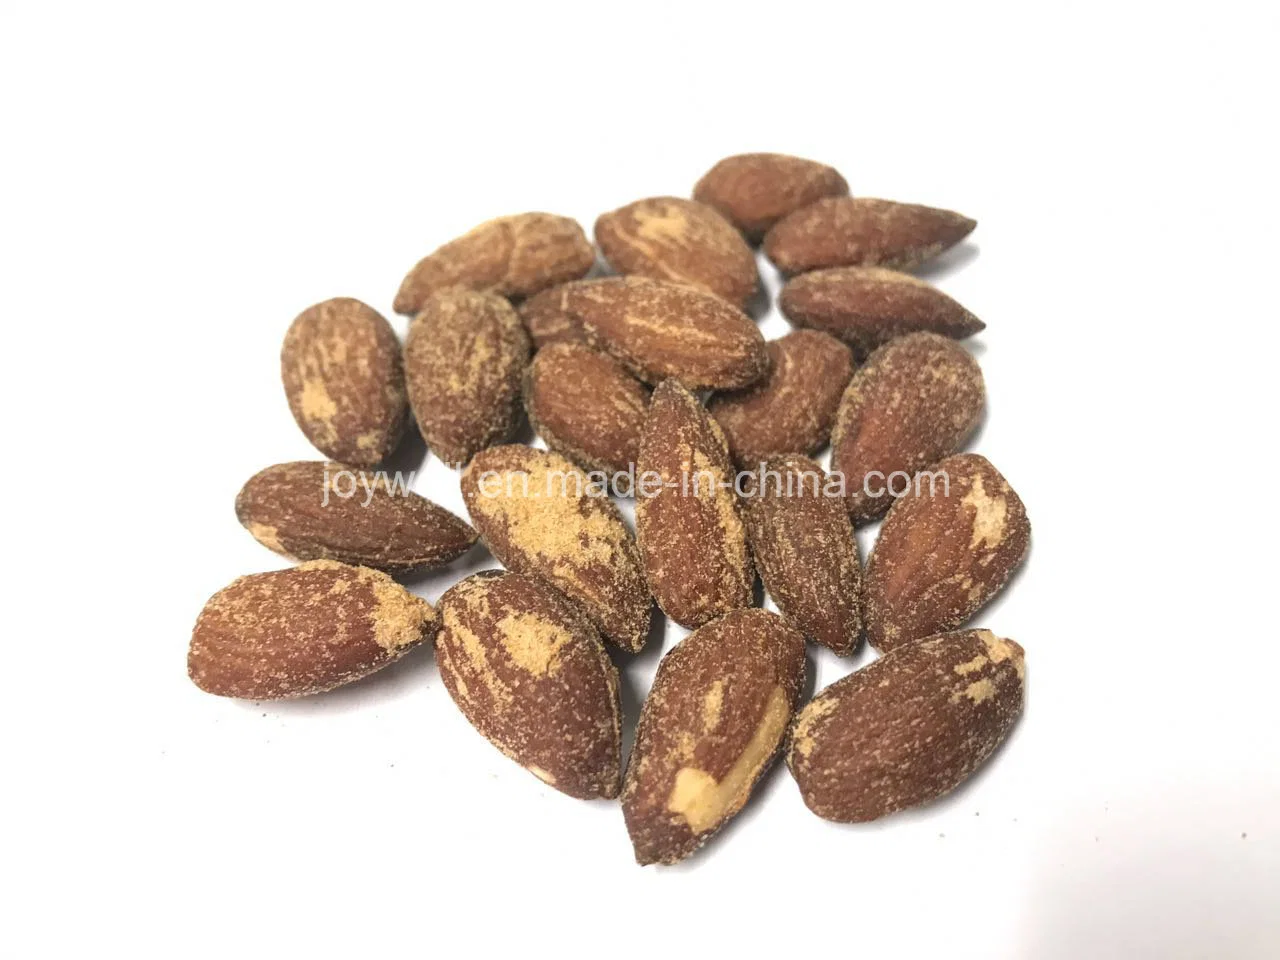 High Nutrition Salted Almond Healthy Snacks with Brc/HACCP